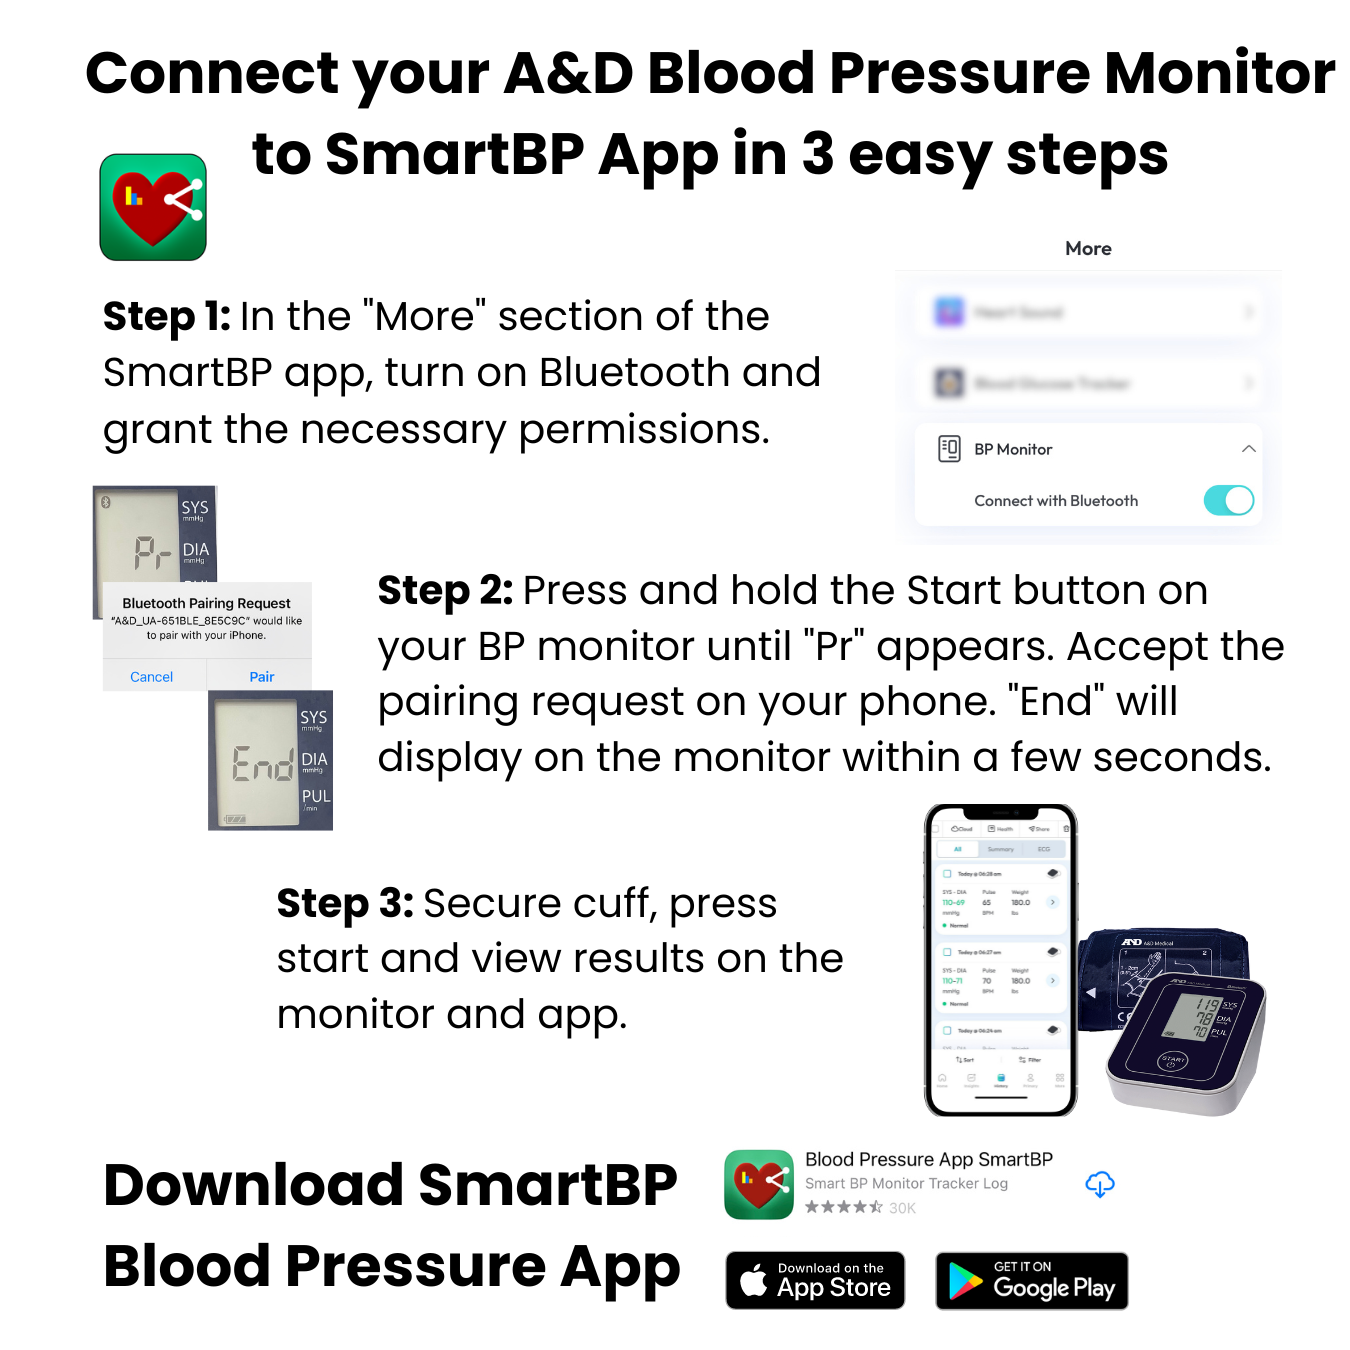 5 Best Blood Pressure Apps to Help You Track Your Numbers